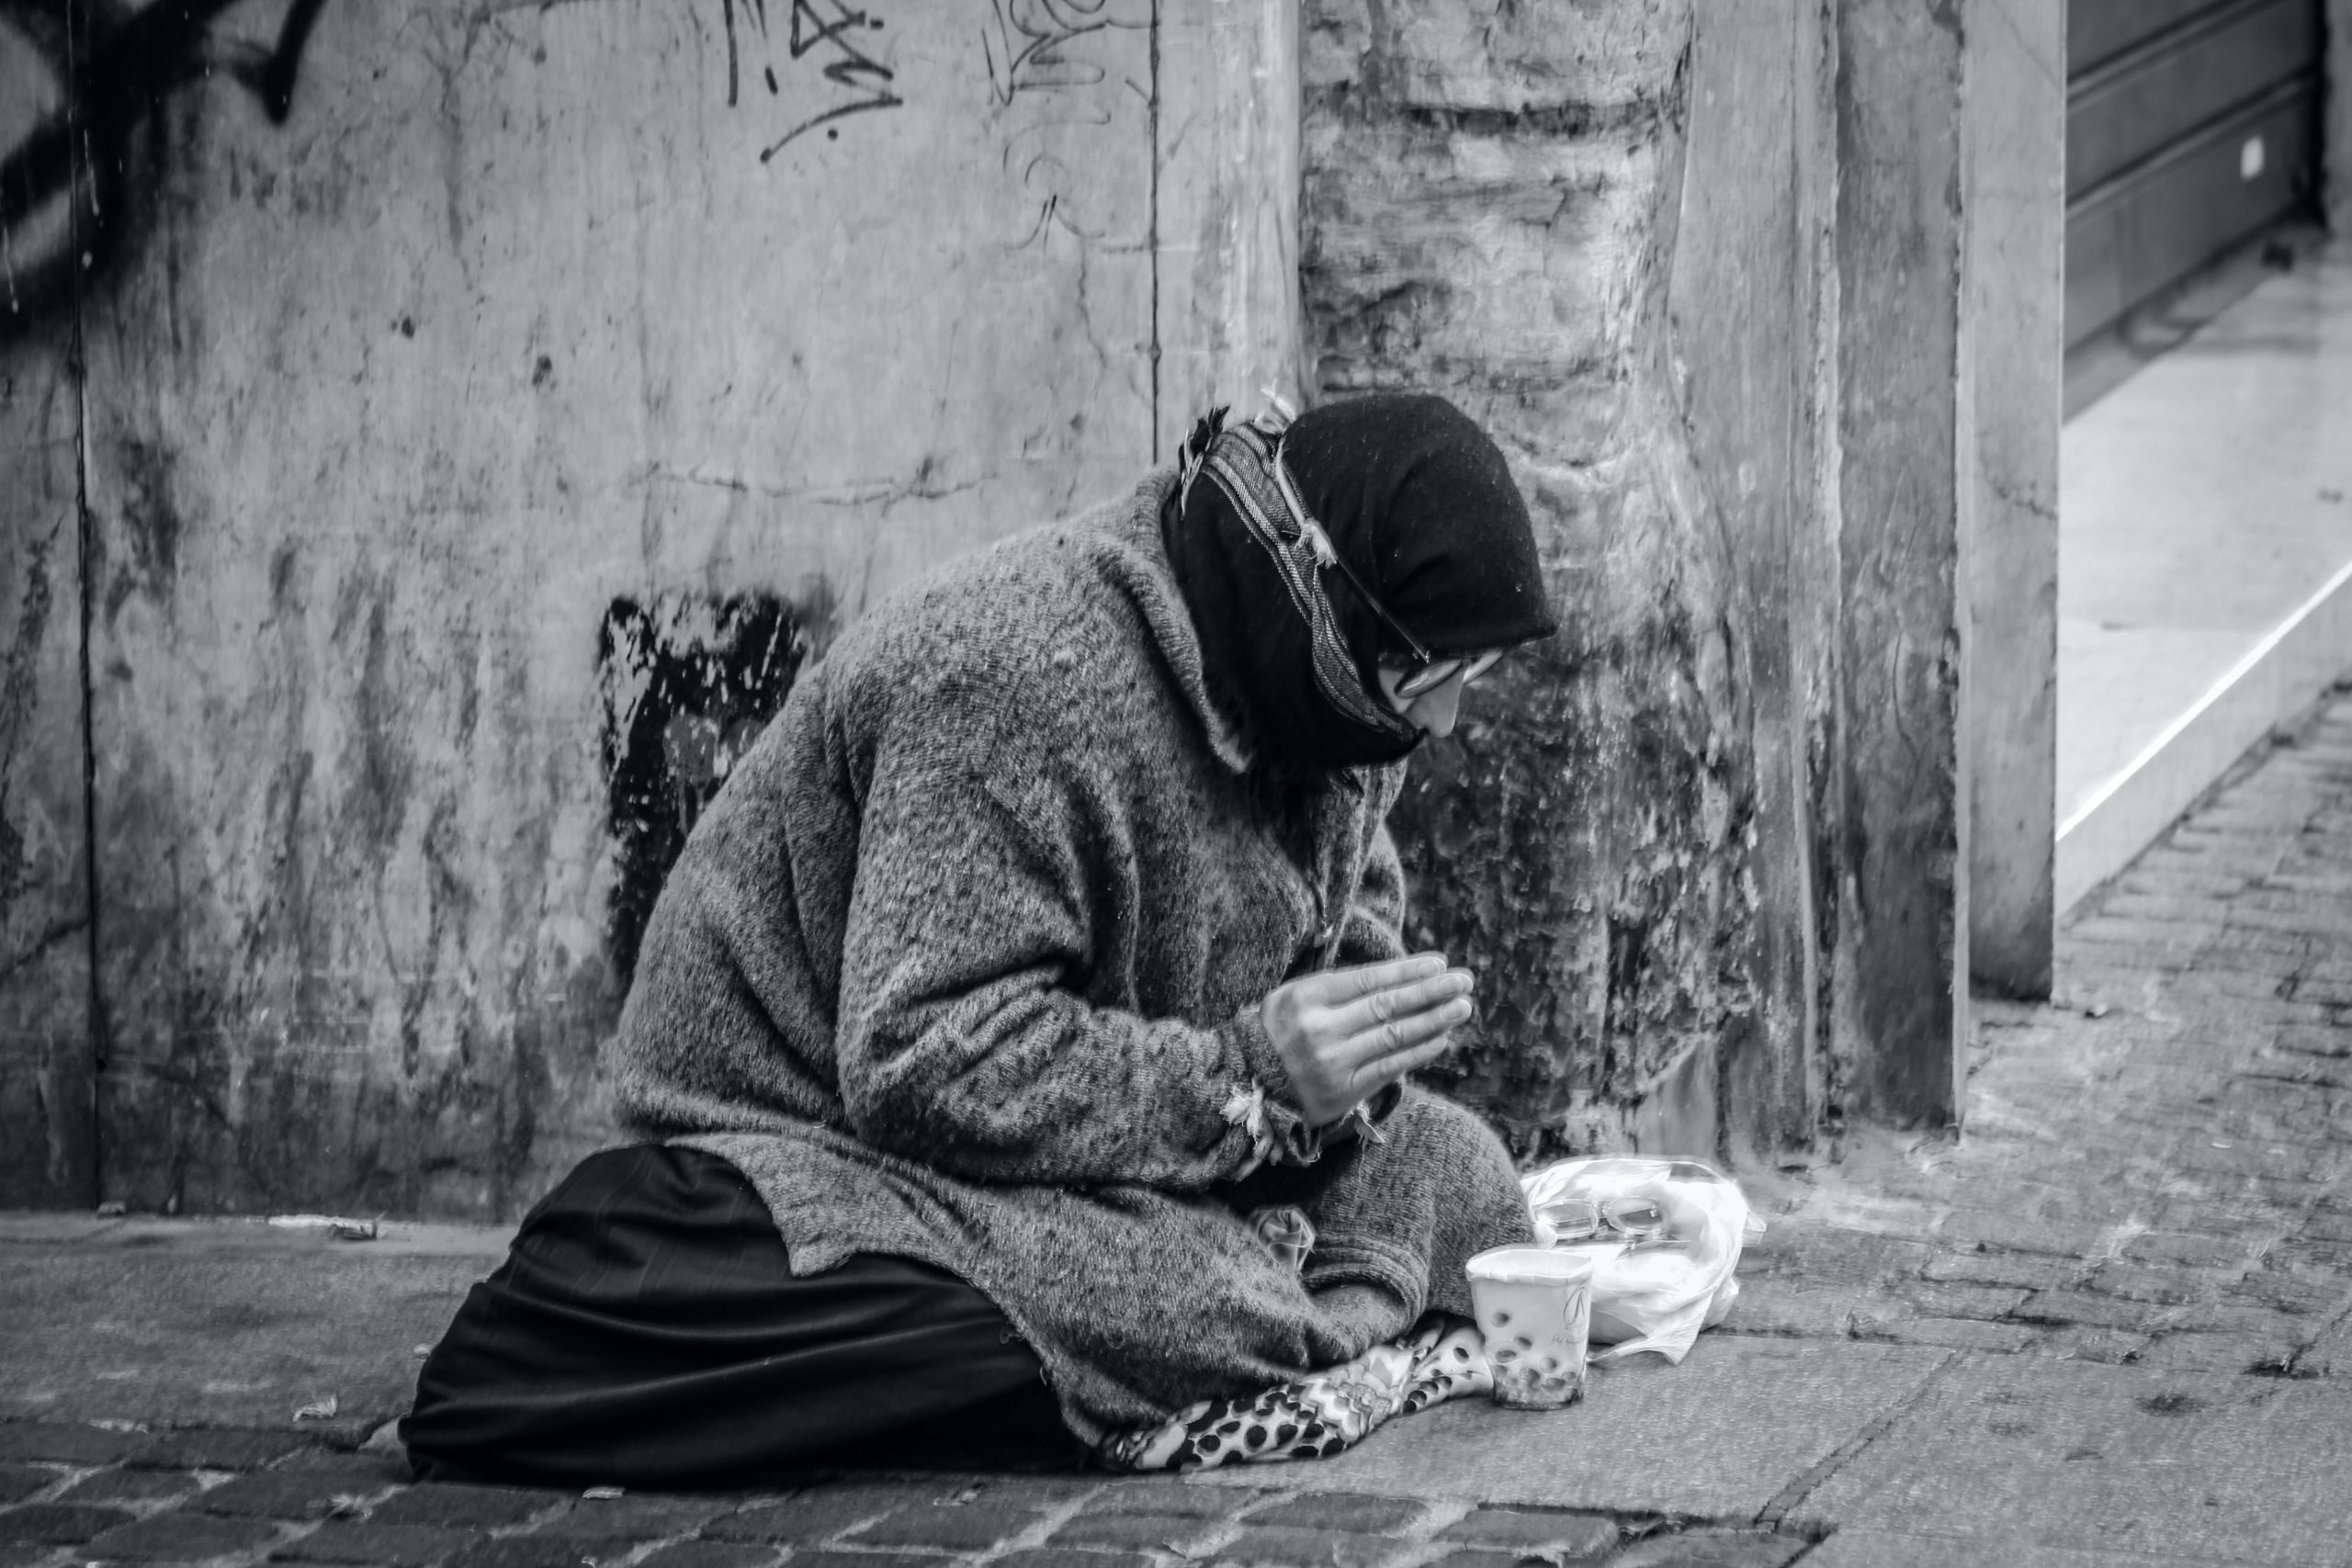 homeless man in the street eating out of a container while attempting to recover from drug addiction